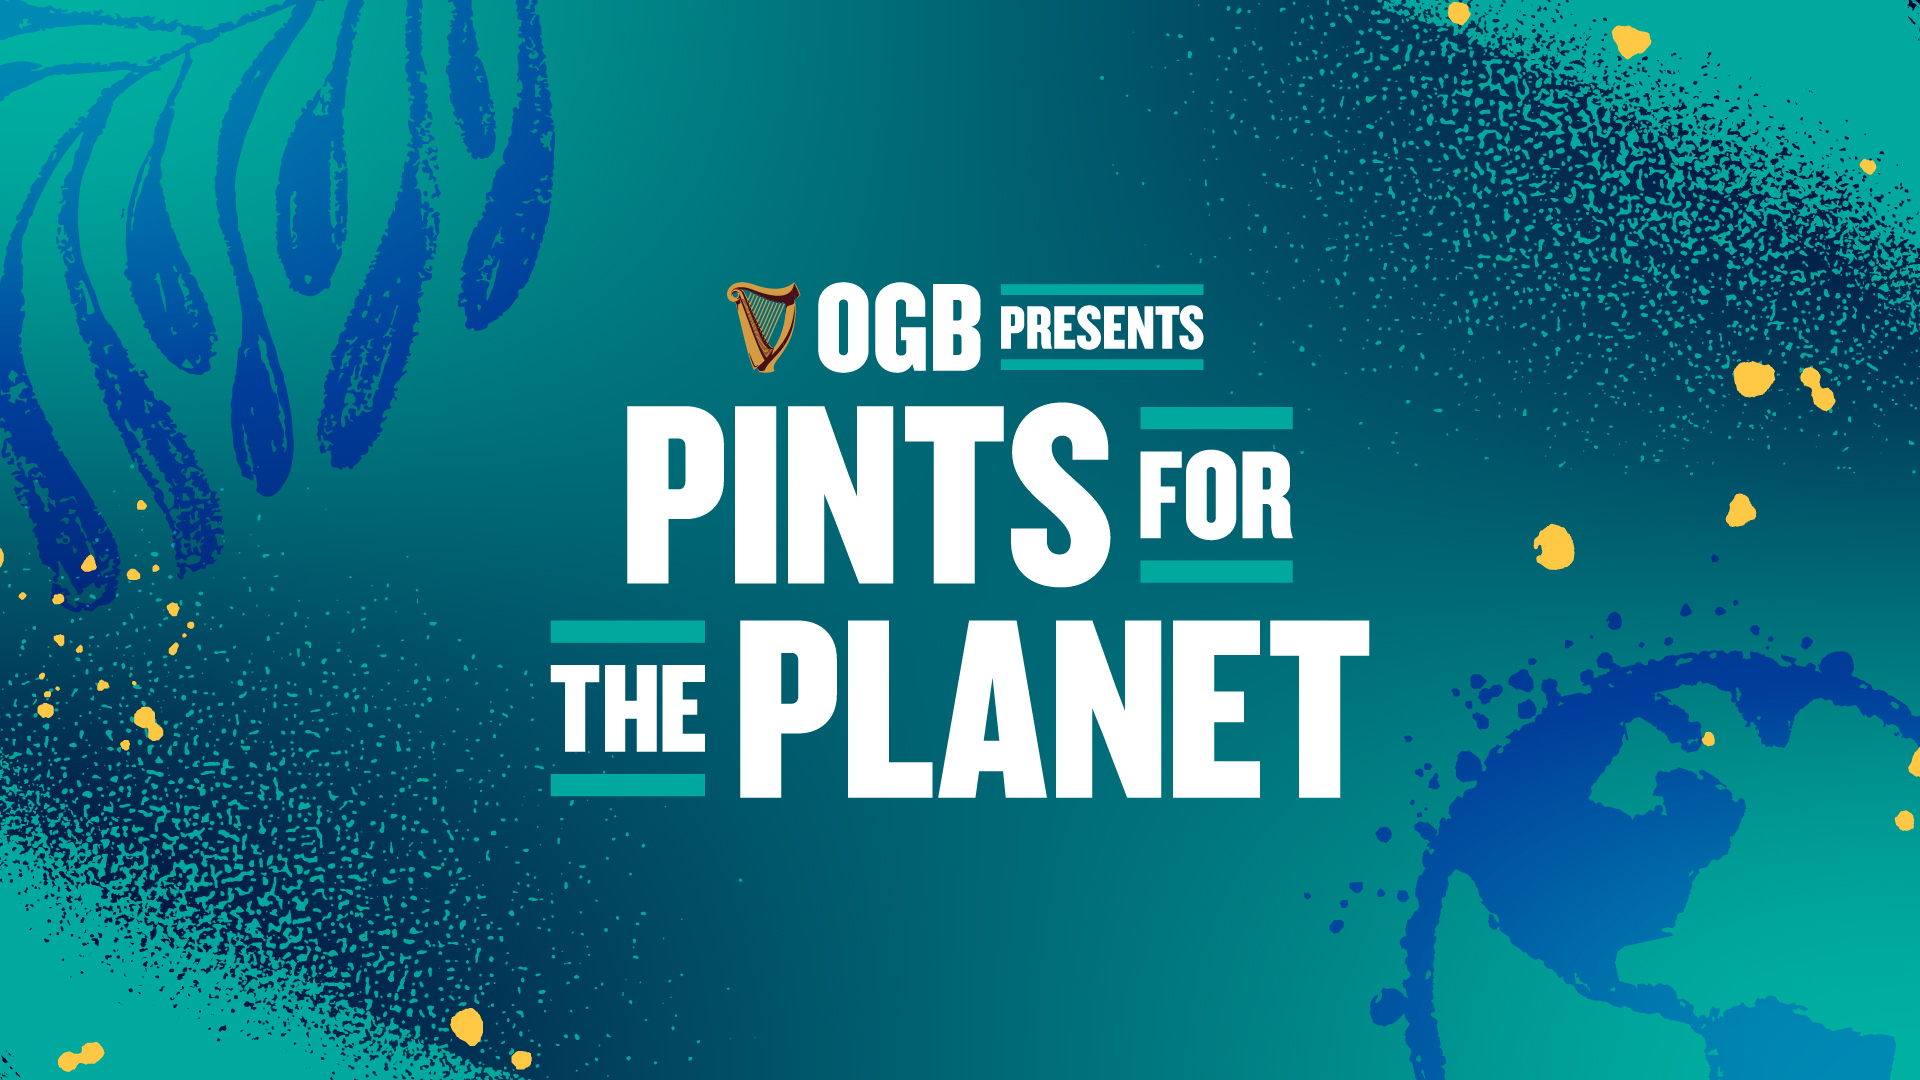 Guinness Open Gate Brewery Pints for the Planet Beer Dinner, Chicago, Illinois, United States